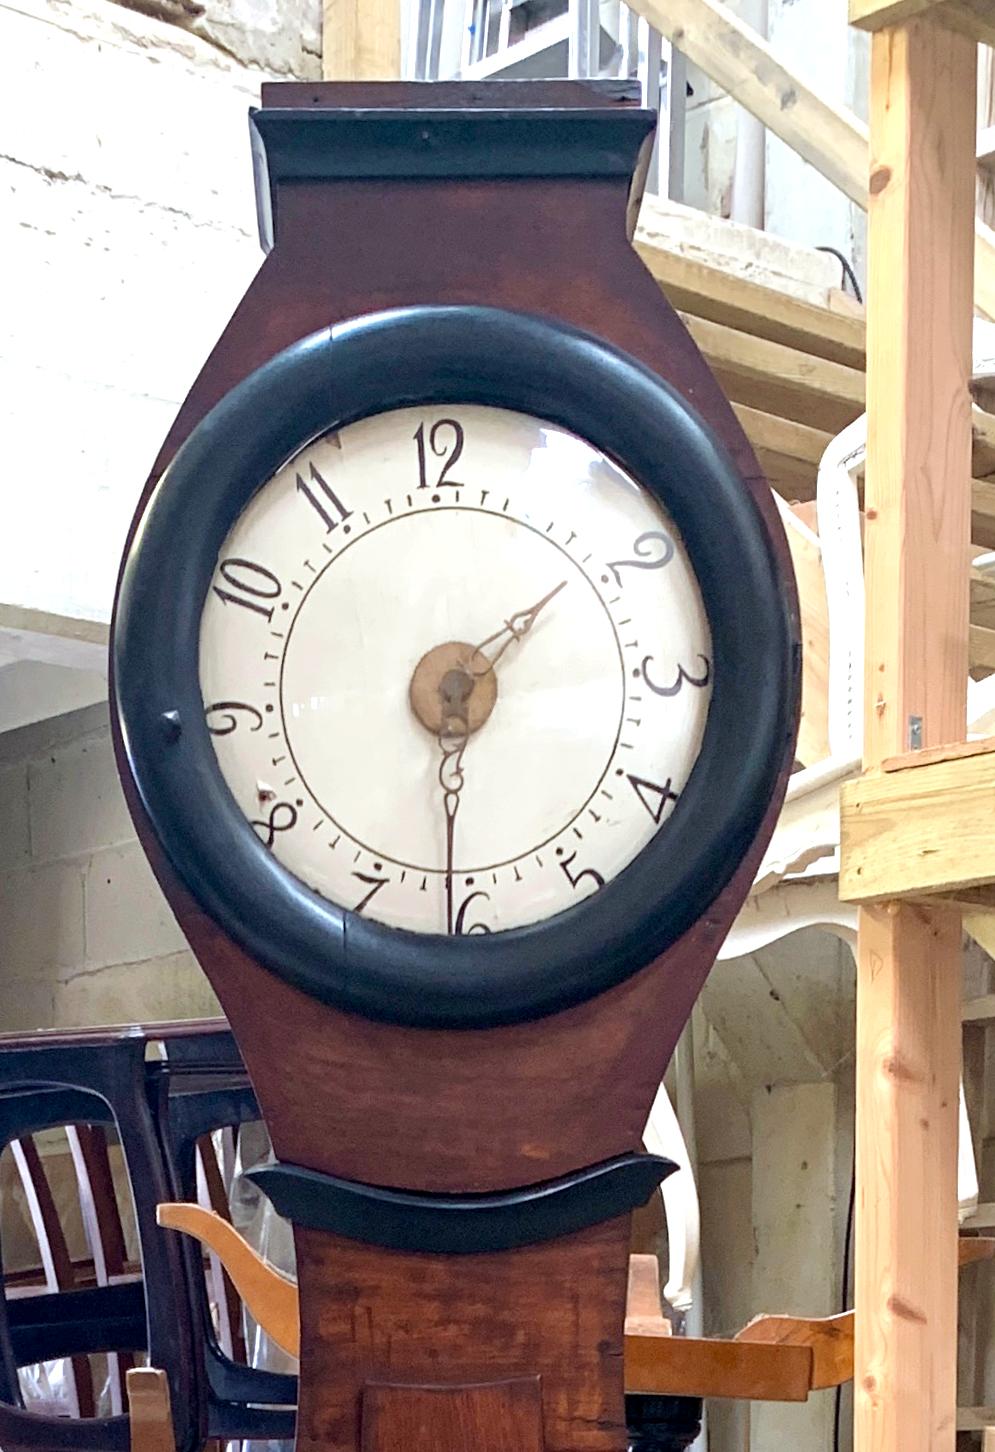 Antique Swedish mora clock from early 1800s in natural finish and with a great waisted shape body and a good face with lots of detail with ormolu style accents. Measures: 210cm.

It has the Classic extended belly of a traditional Swedish mora clock.